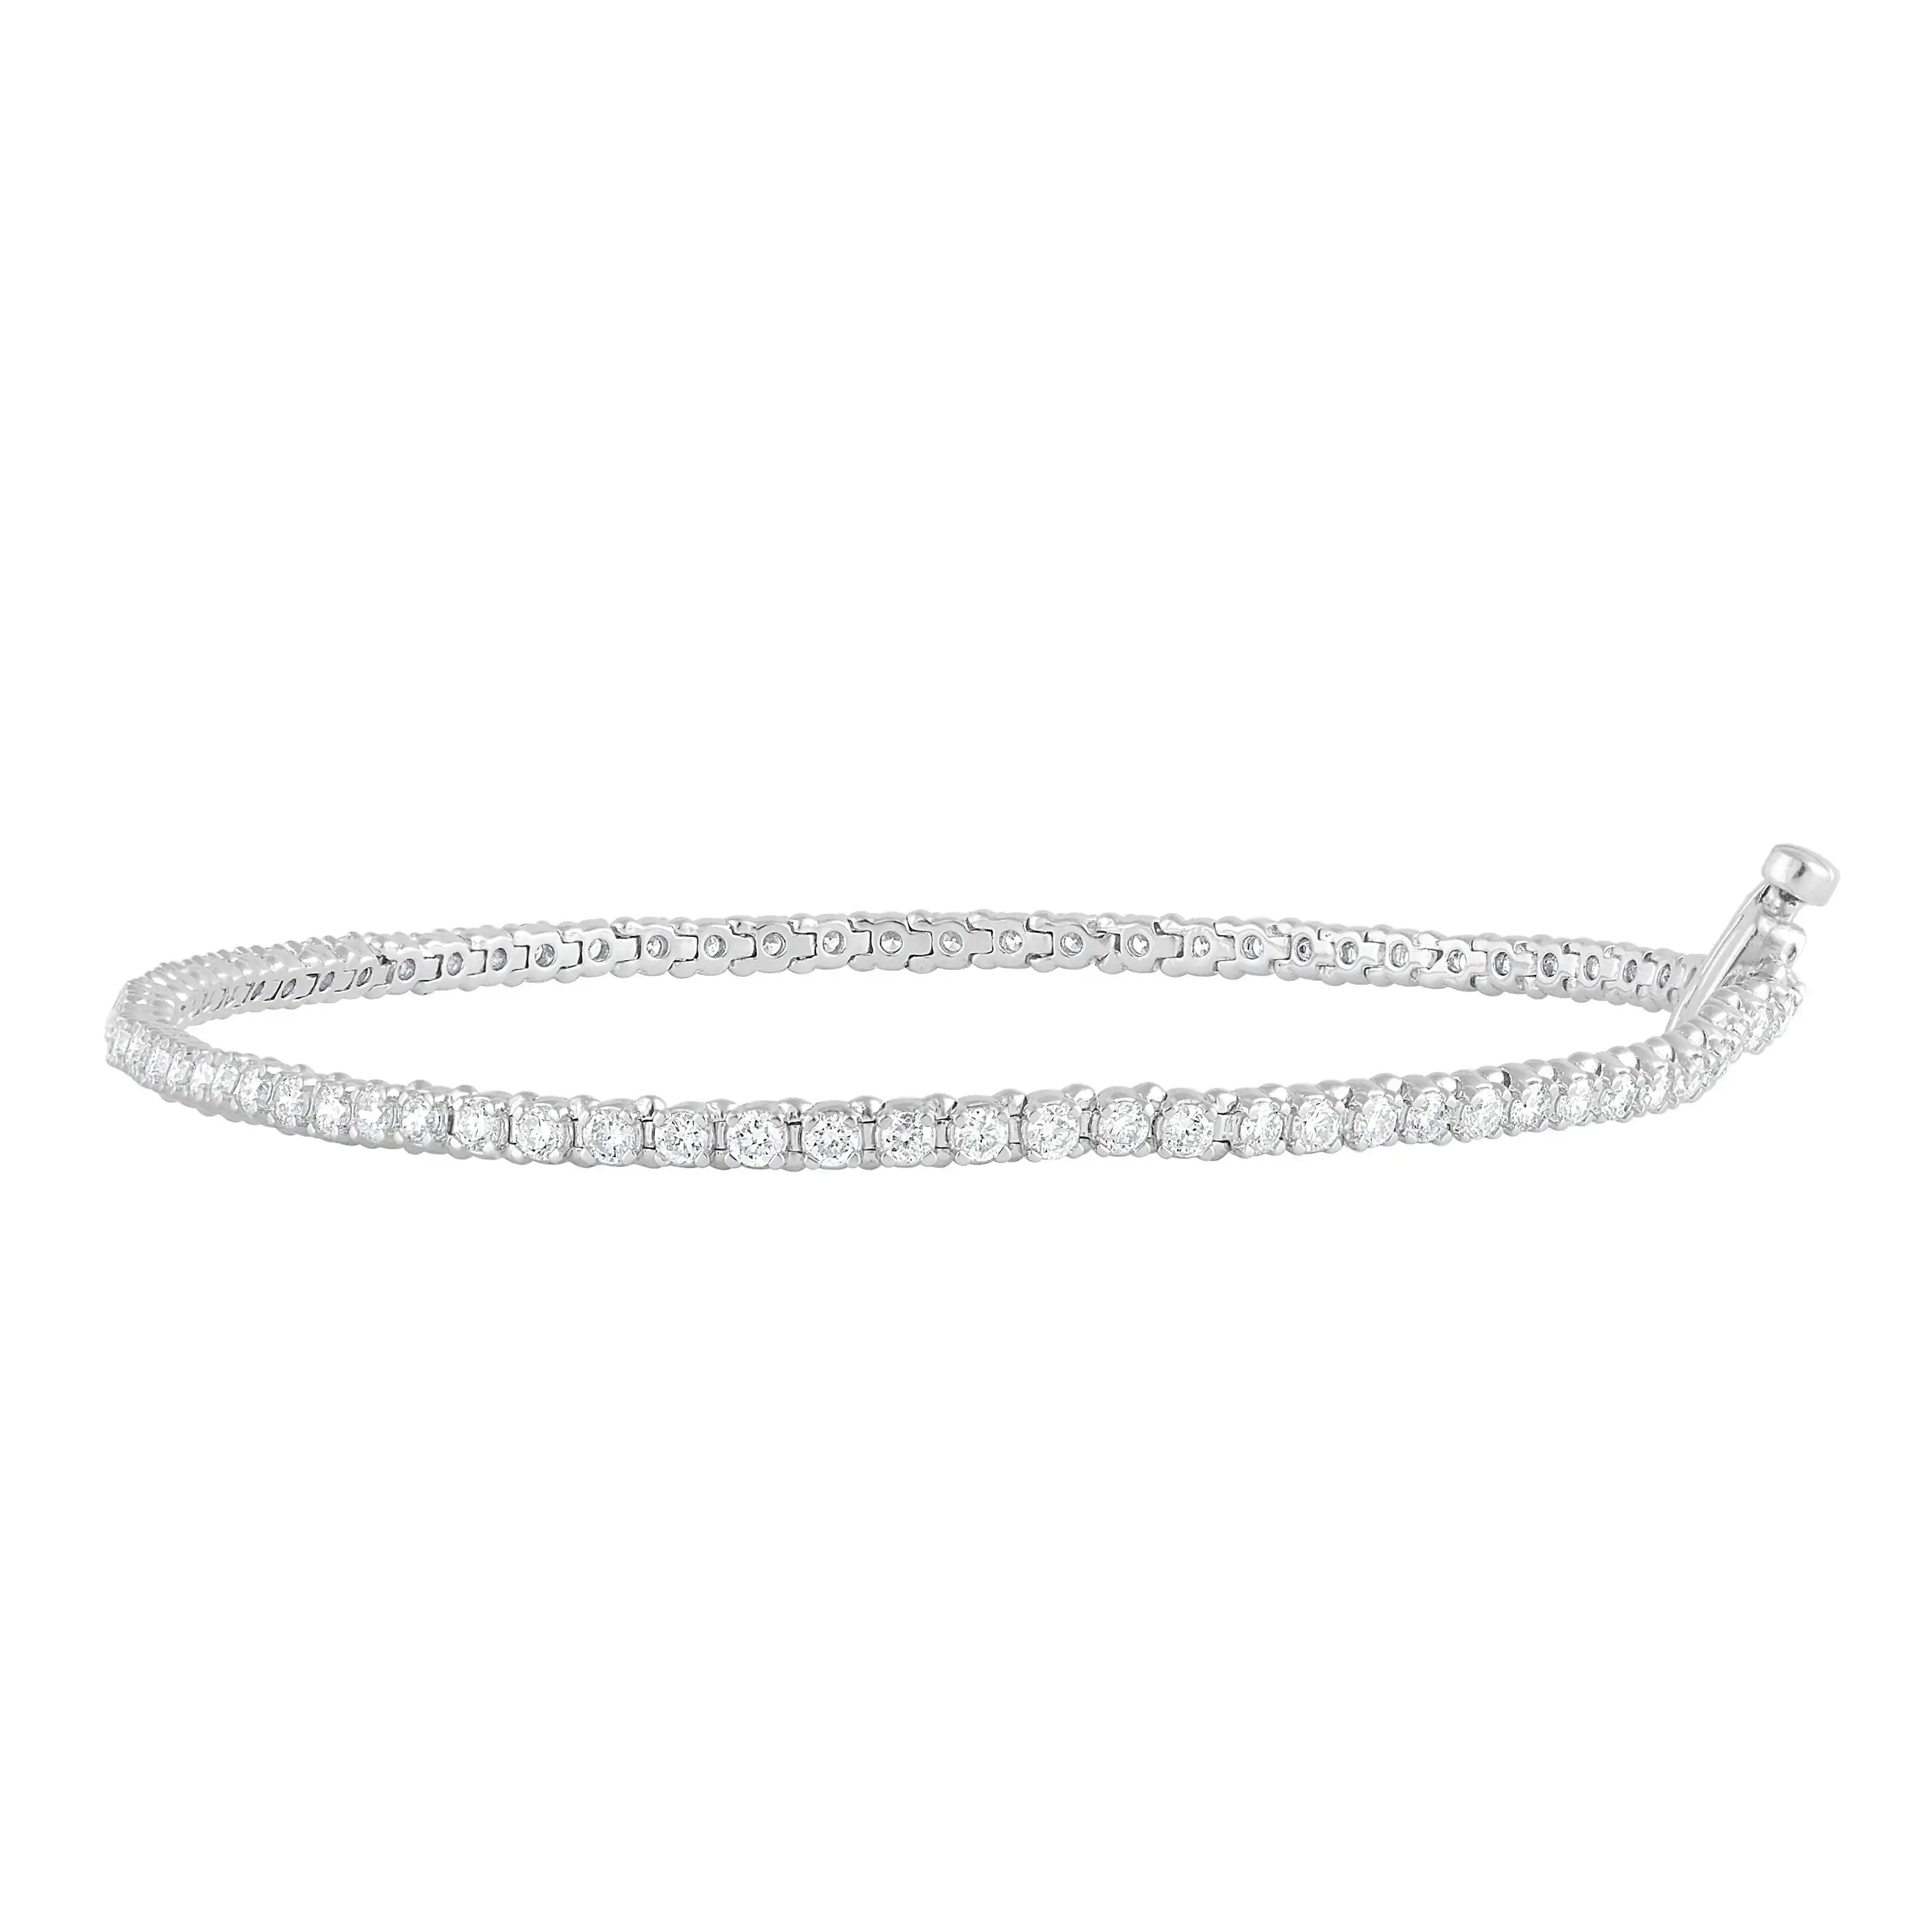 Mirage Tennis Bracelet with 1.50ct of Laboratory Grown Diamonds in Sterling Silver and Platinum